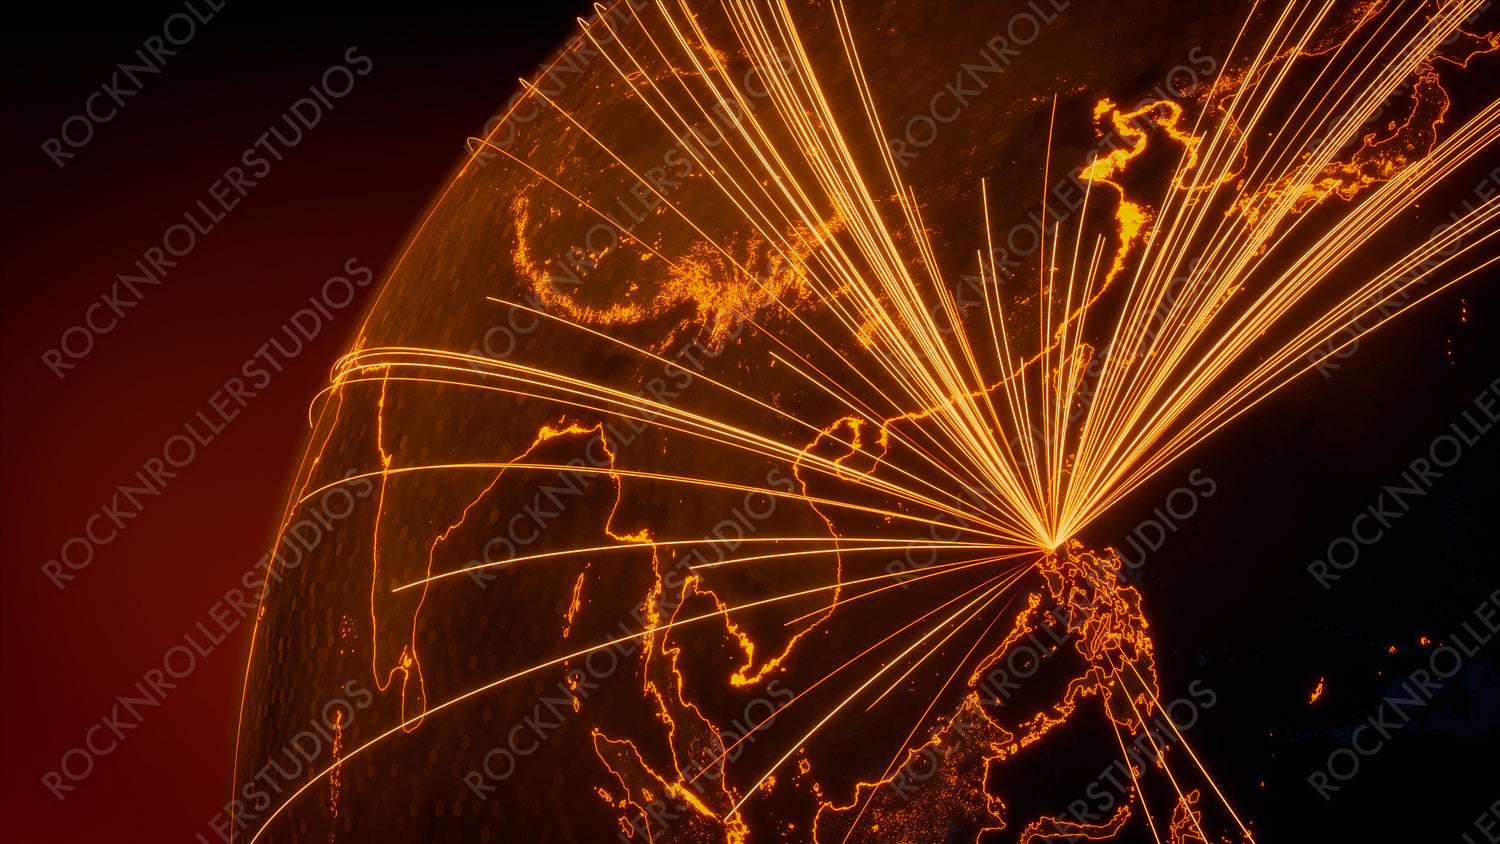 Futuristic Neon Map. Orange Lines connect Manila, Philippines with Cities across the World. International Travel or Communication Concept.